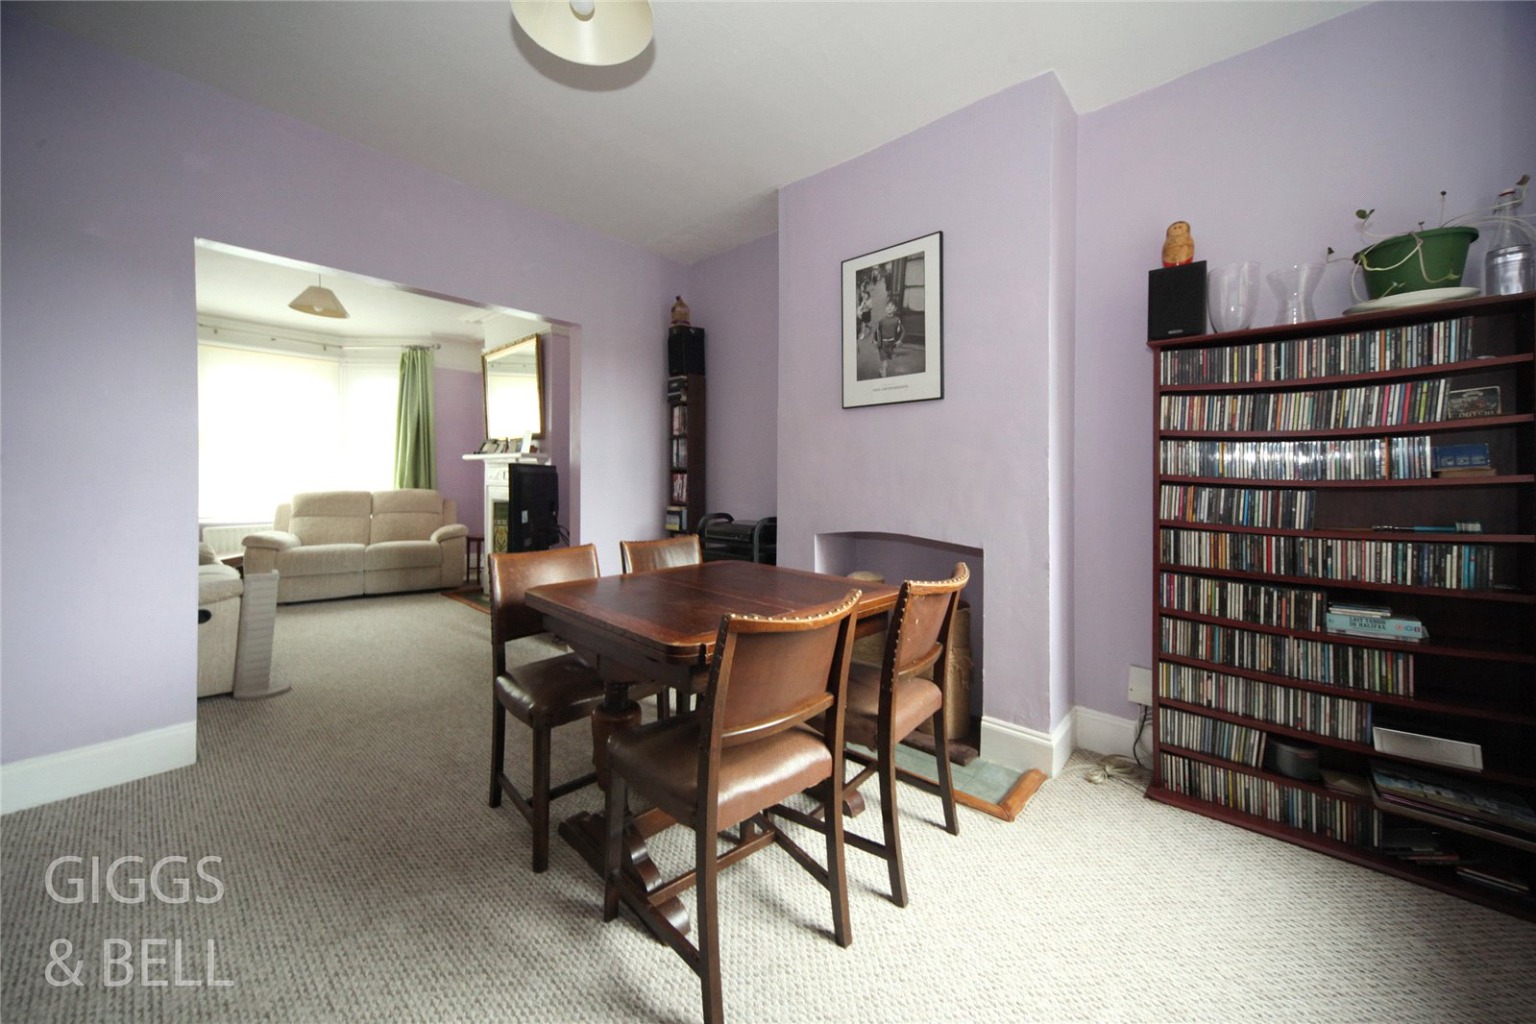 3 bed terraced house for sale in High Town Road, Luton, LU2 